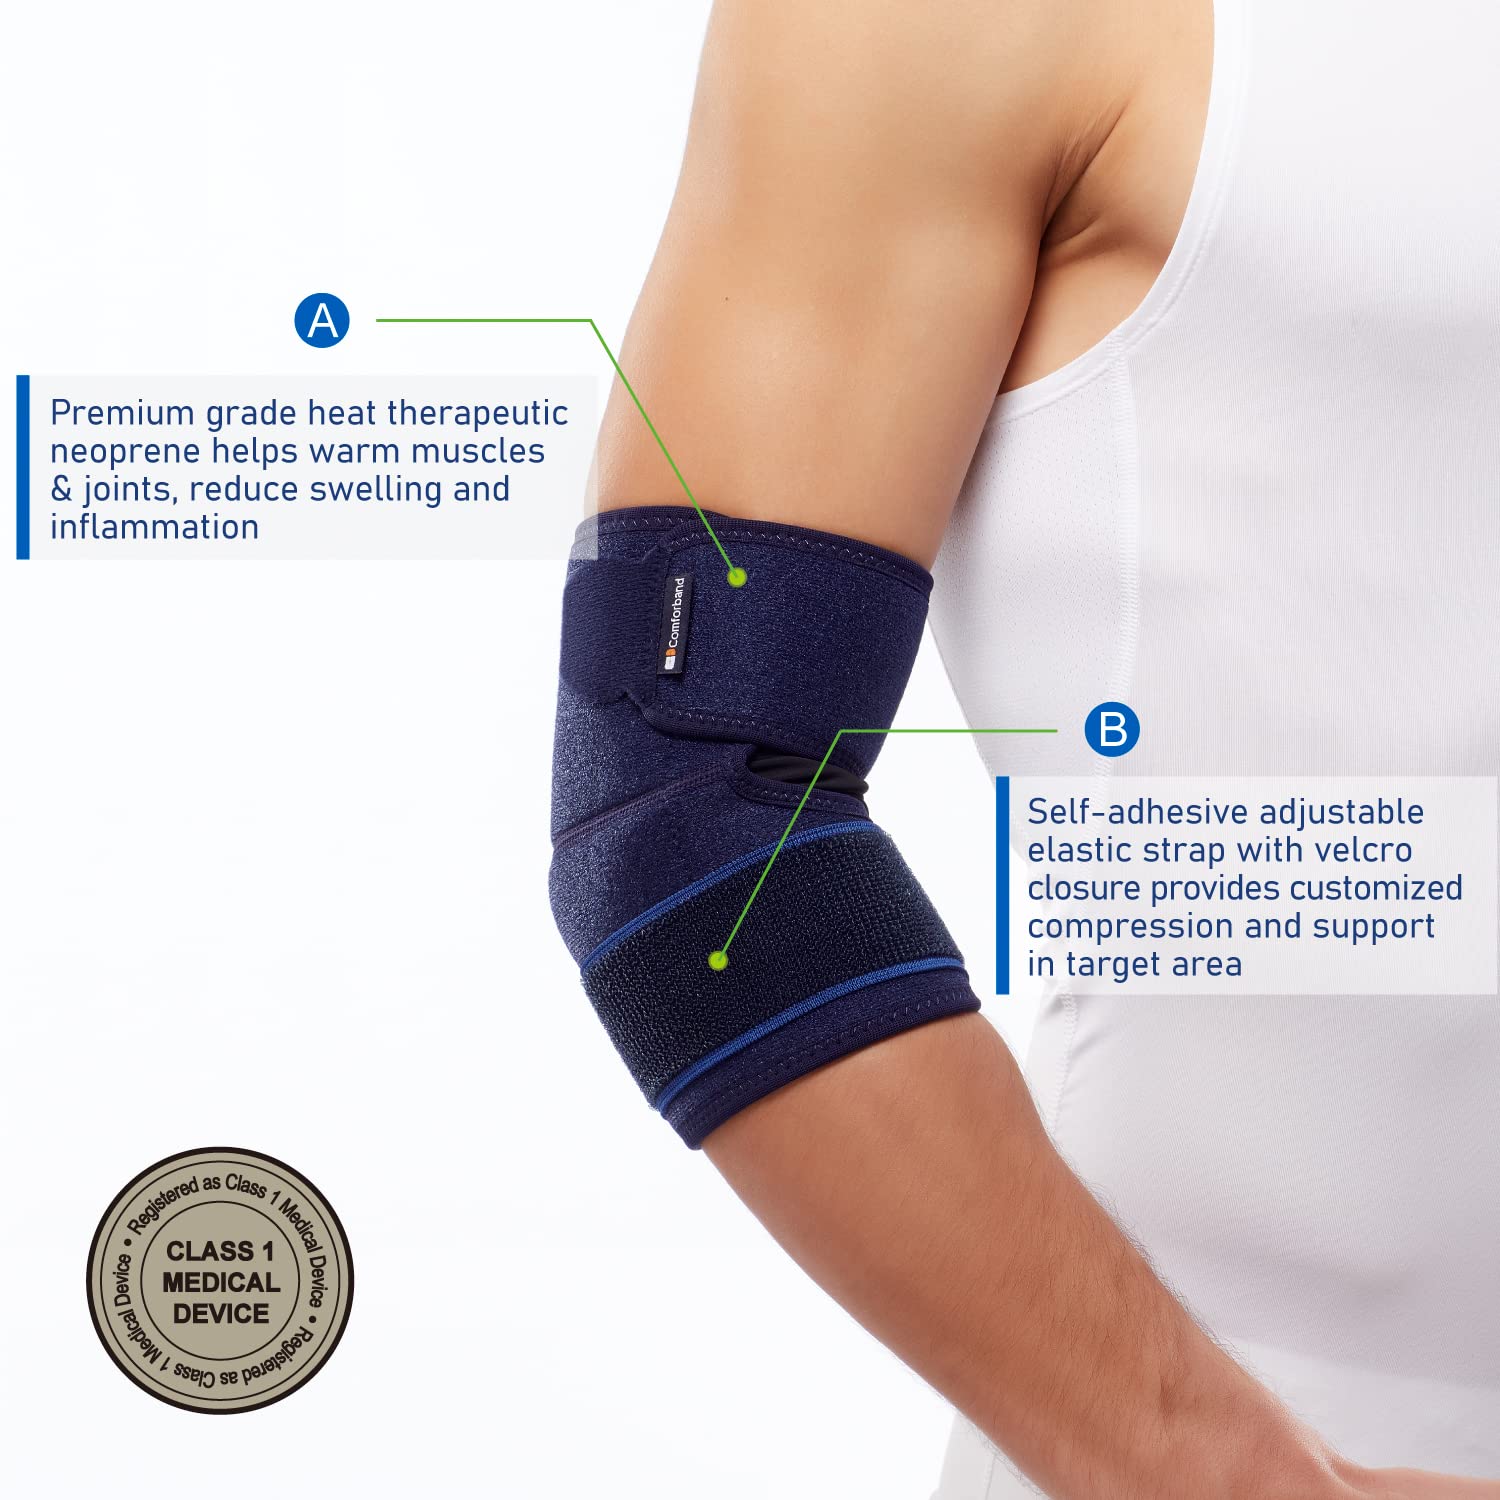 Comforband Adjustable Elbow Support for Epicondylitis, Tennis Elbow, Golfer’s Elbow, Bursitis, Elbow Sprains, Strains, Tendonitis, Arthritis, Sports Injury Recovery - Elbow Pain Relief - One Size fits Most